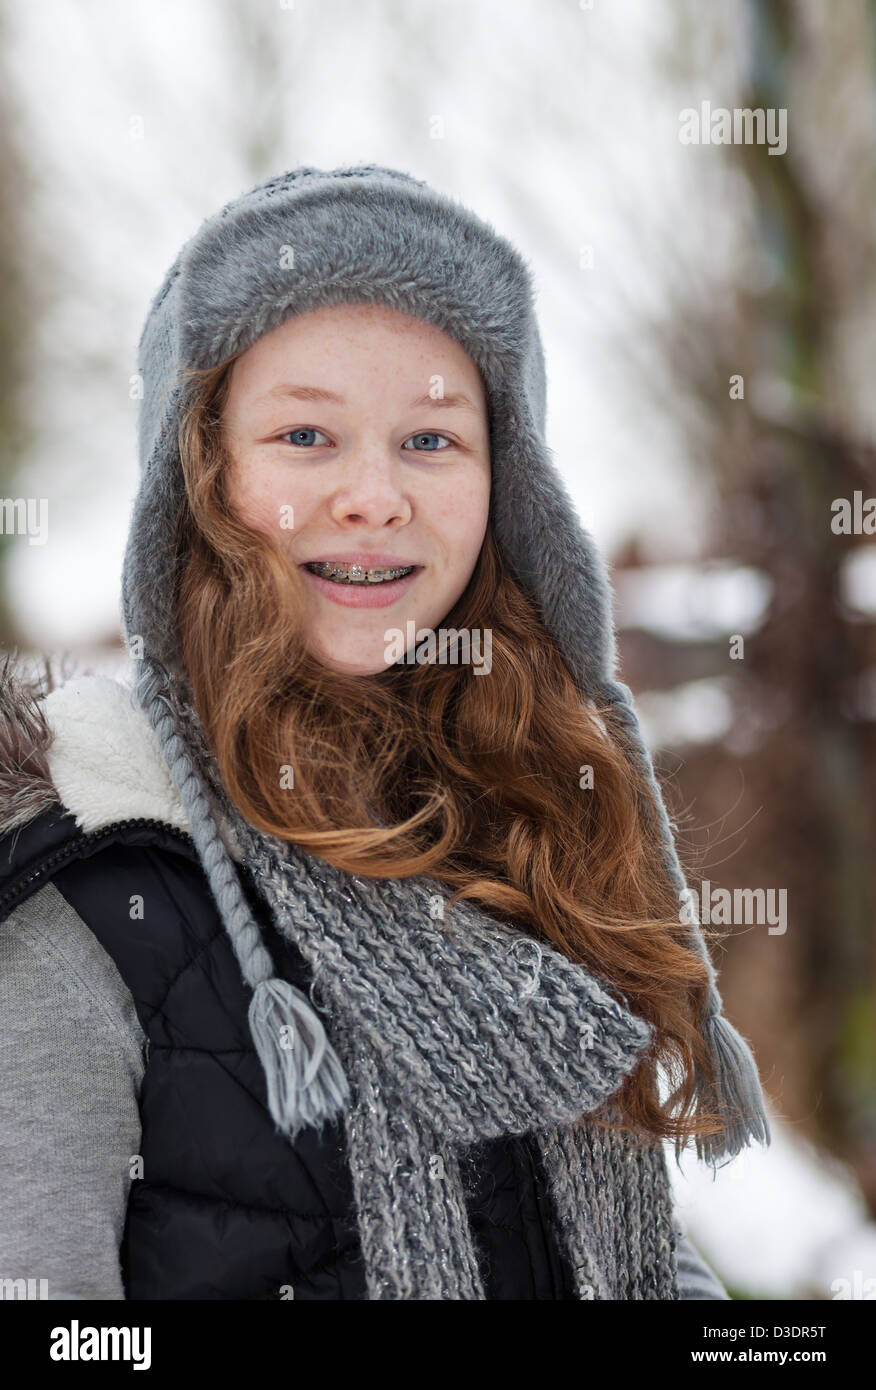 Outdoor portrait of a cheerful teenager girl in winter cloths Stock Photo